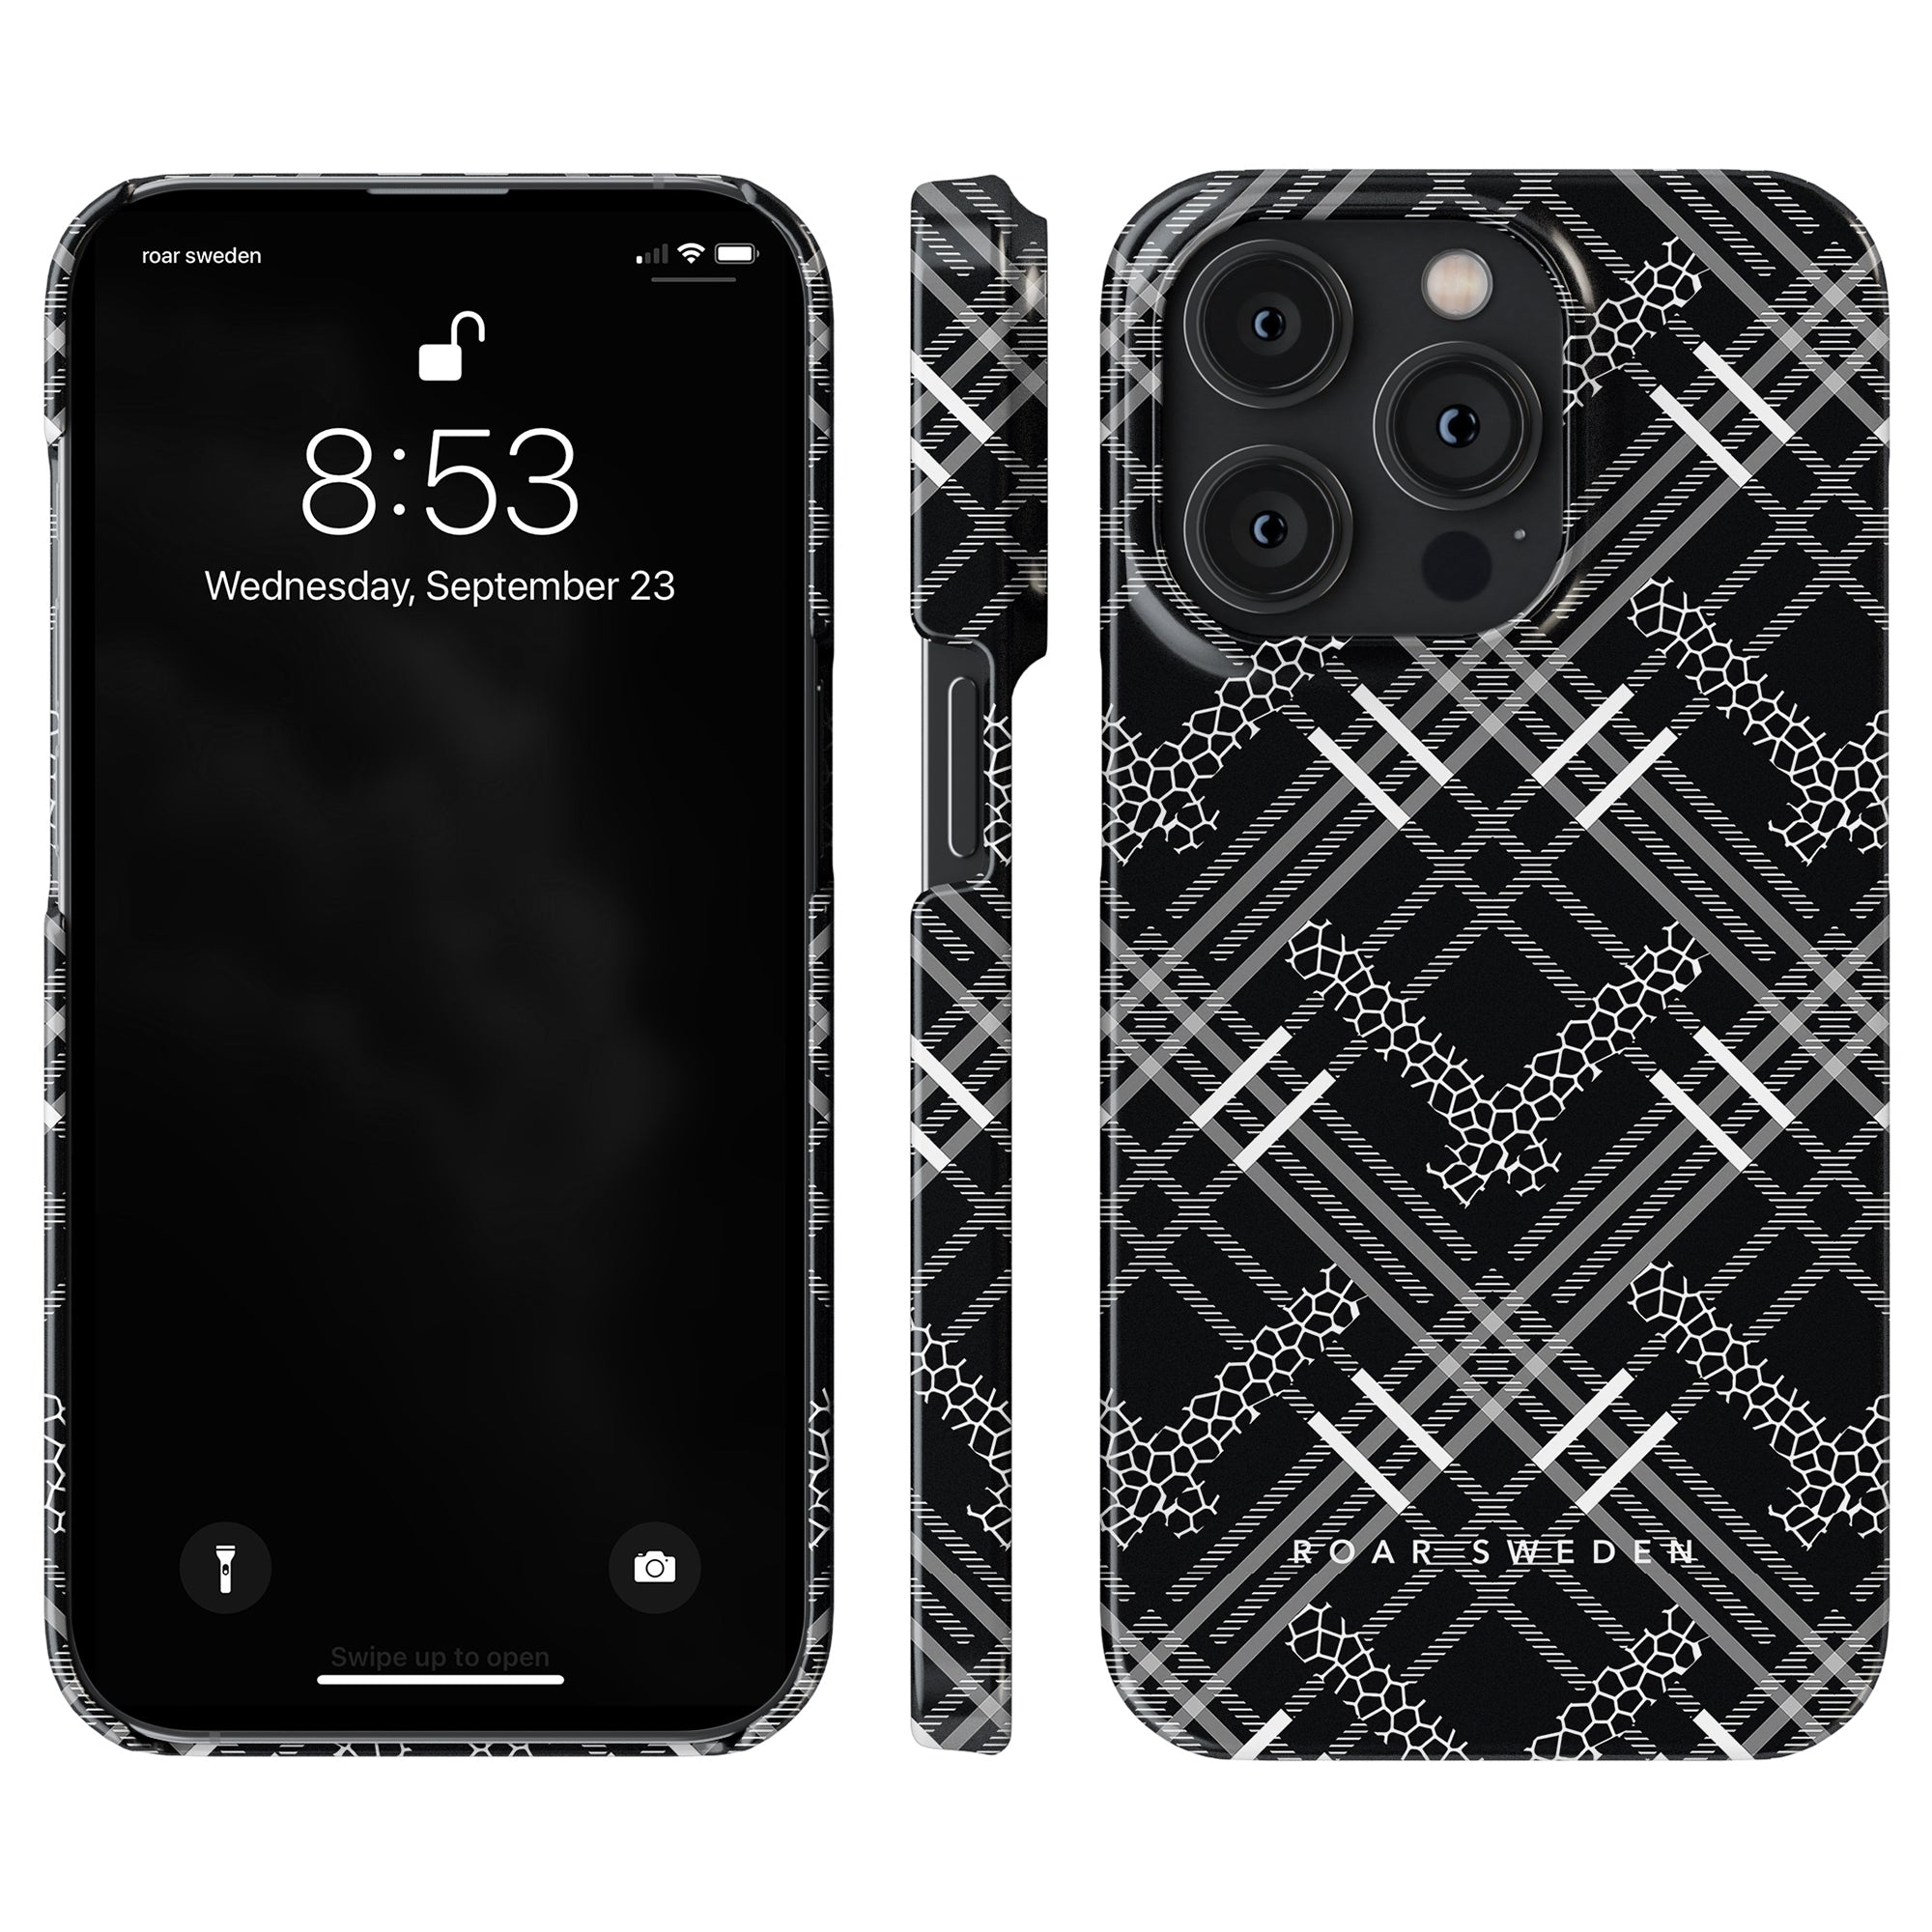 A Tartan Giraffe - Slim case for the iPhone 11 Pro, featuring a slim design and graphic pattern.